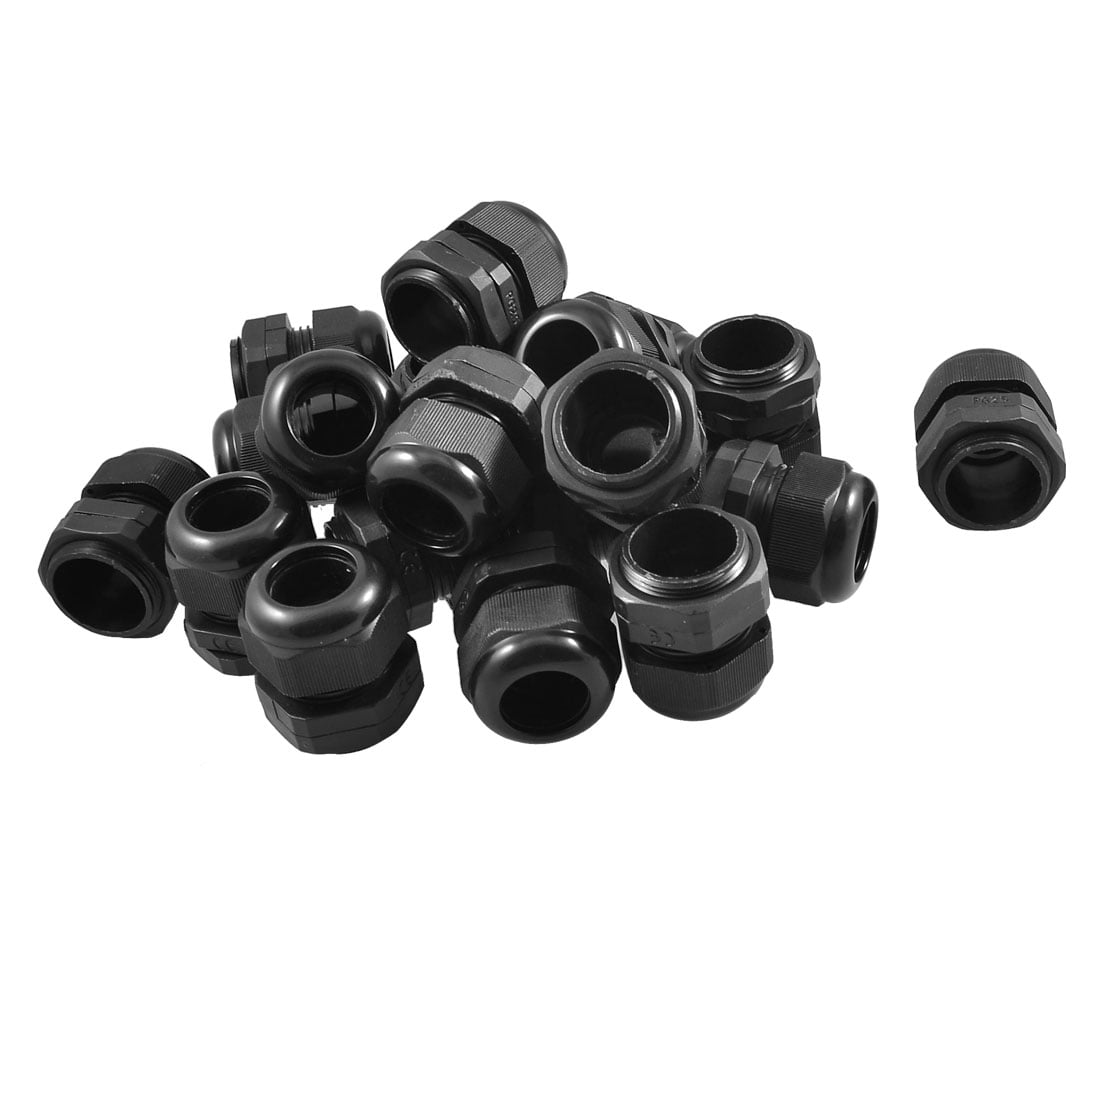 20PCS Waterproof Fixing Gland Connector PG7 for 3.5-6mm Dia Cable Wire Black 